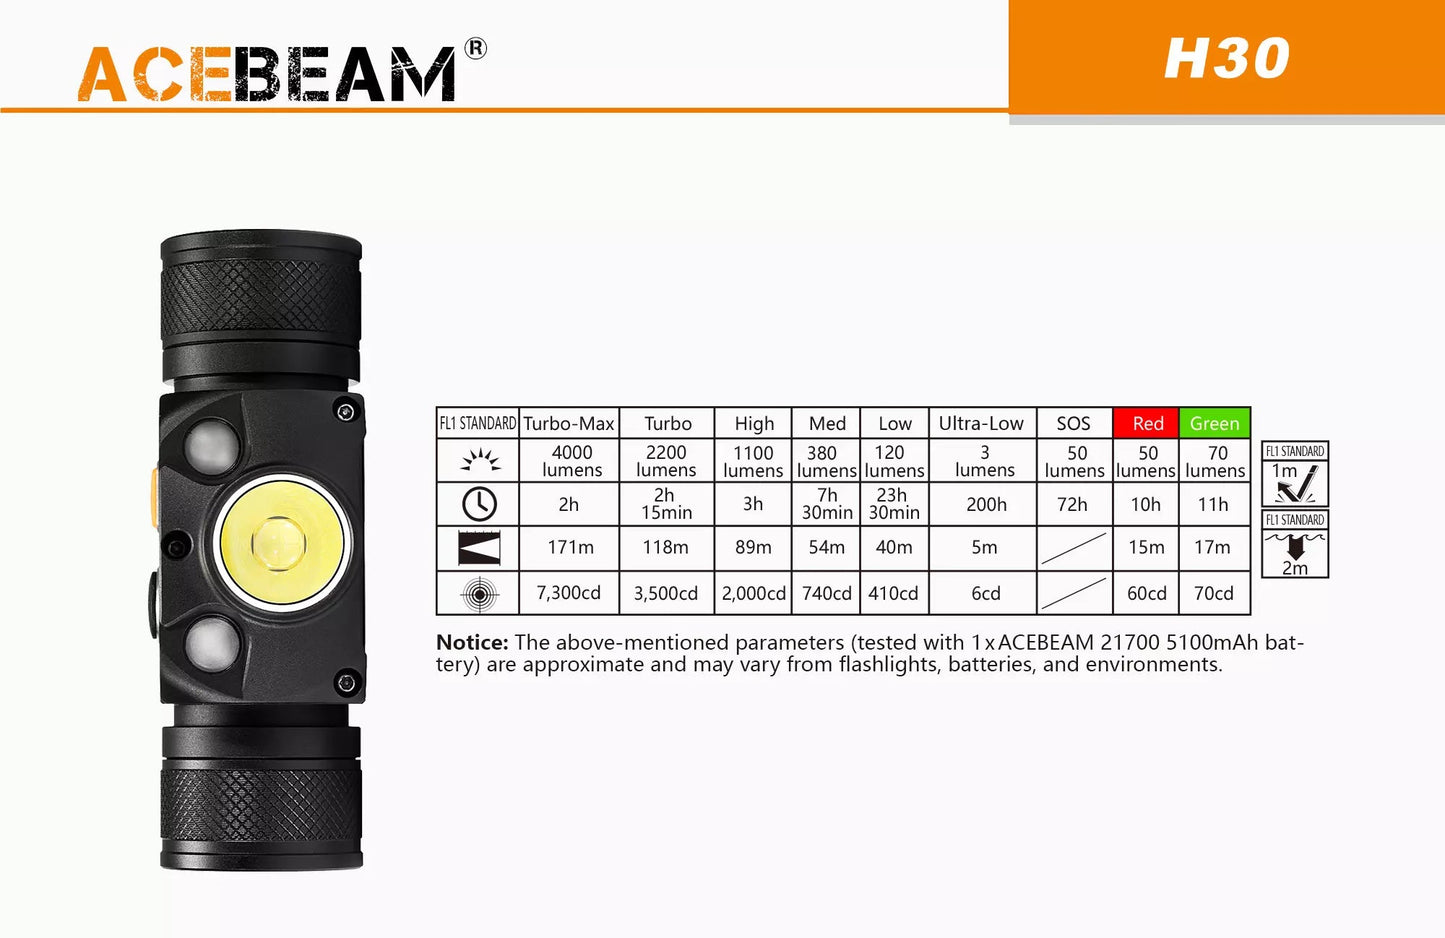 AceBeam H30 4000 Lumen Red and Green Rechargeable Headlamp - Torch Depot